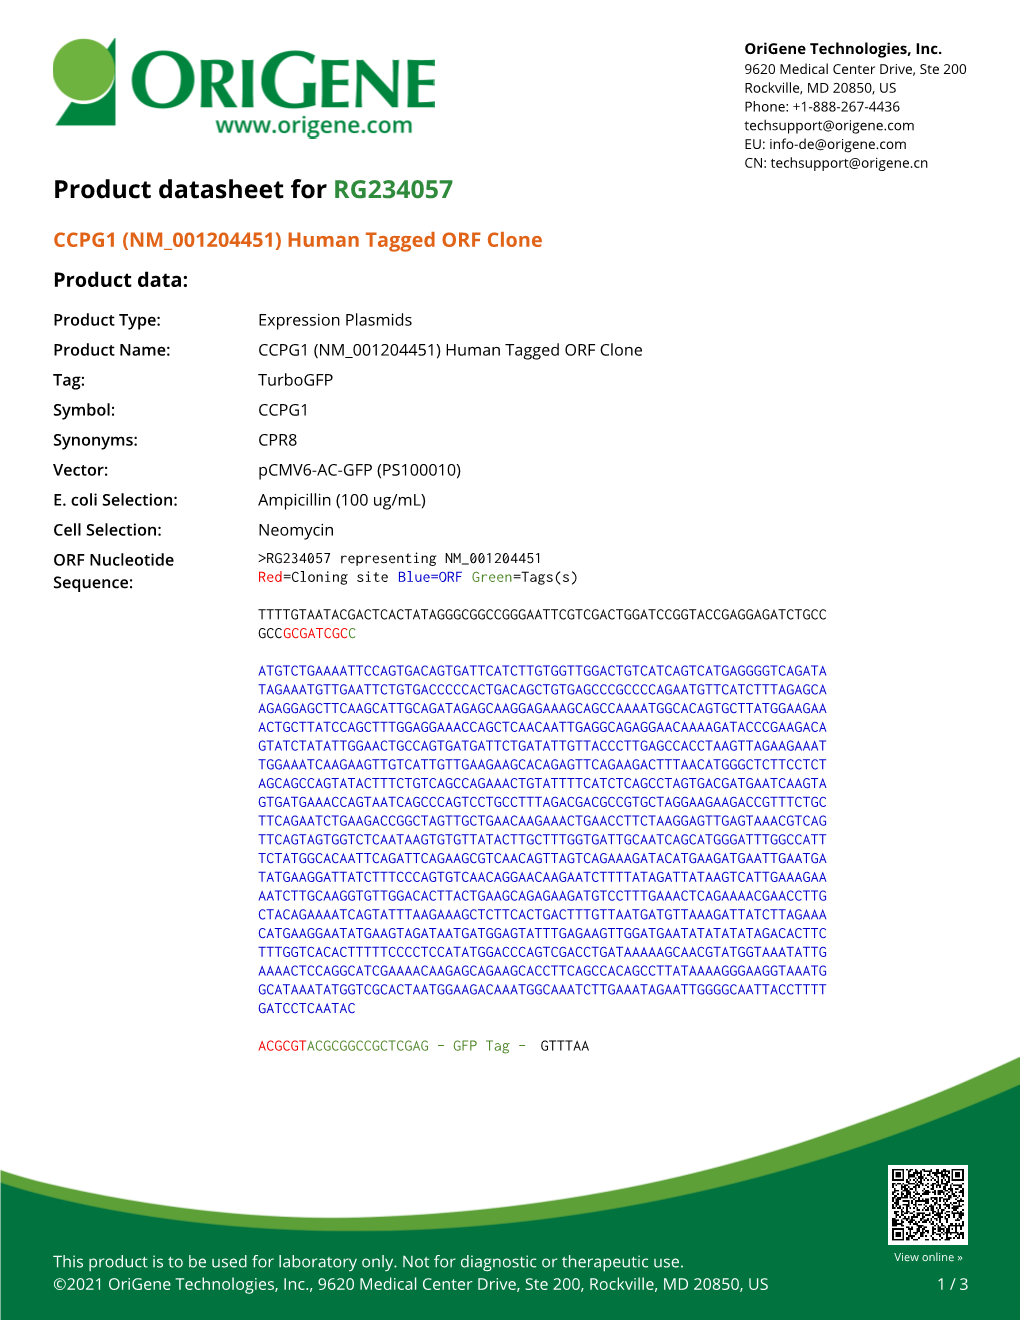 CCPG1 (NM 001204451) Human Tagged ORF Clone Product Data